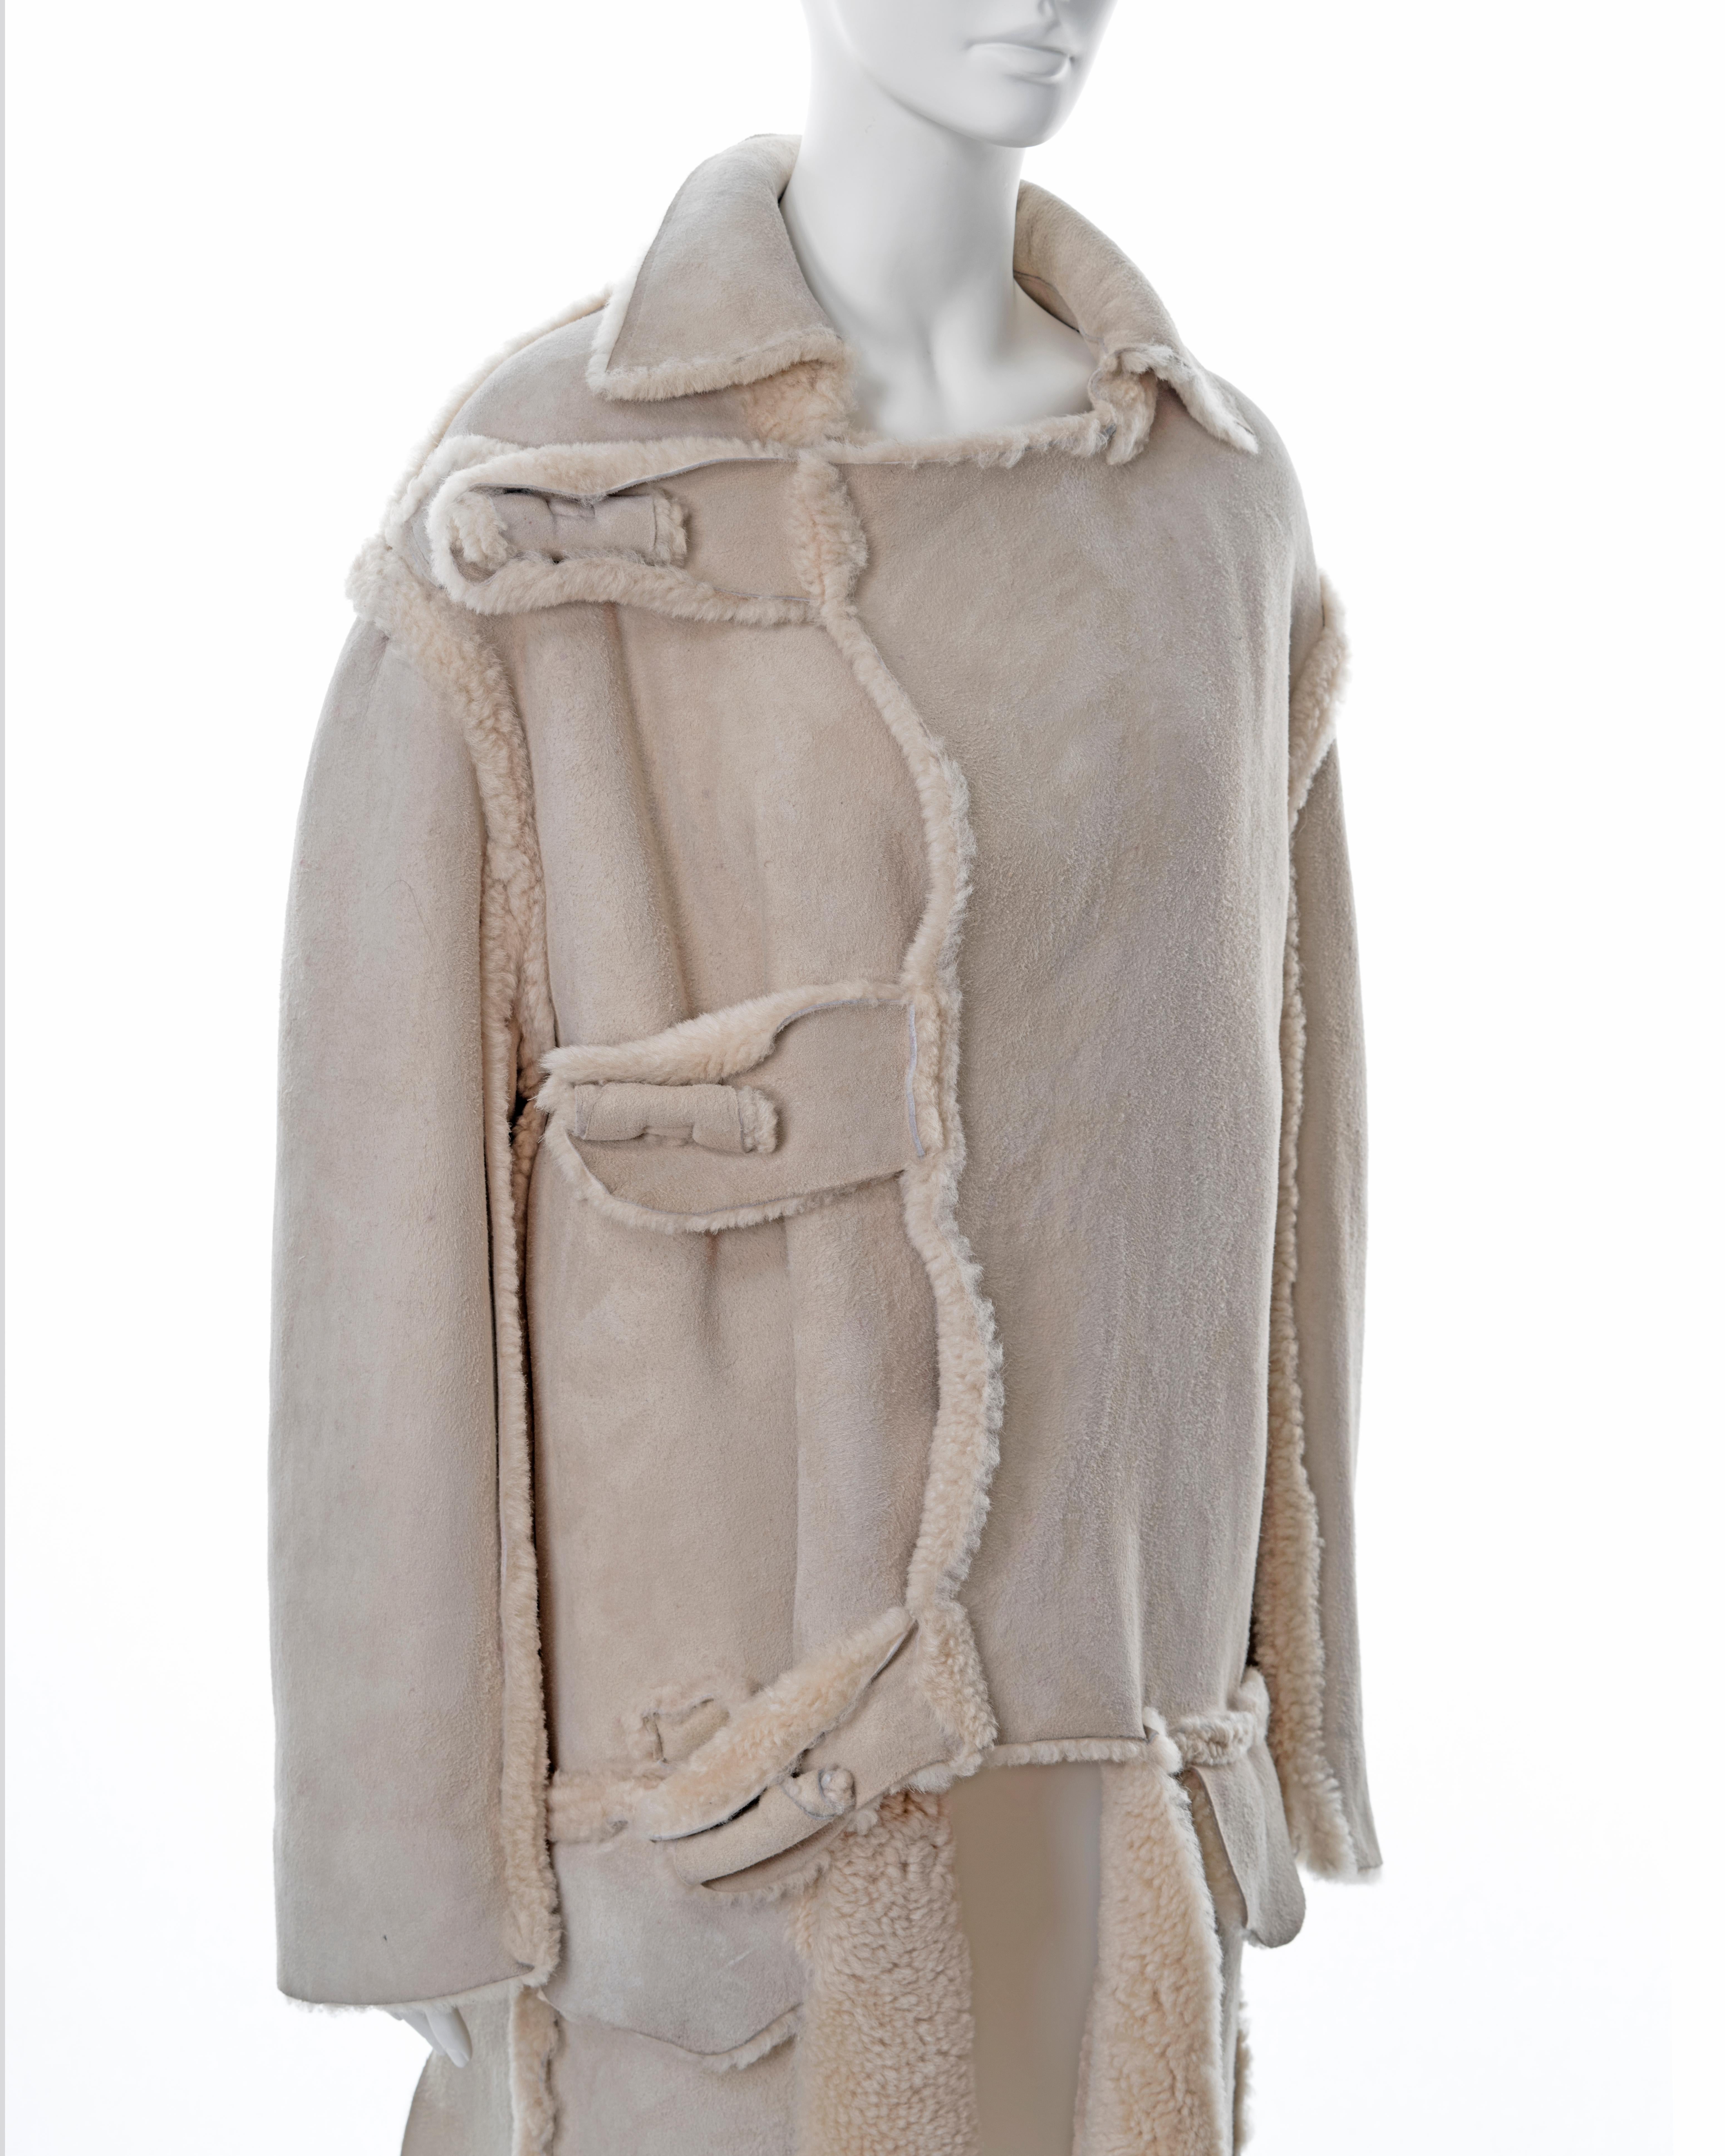 Worlds End by Vivienne Westwood and Malcolm McLaren 'Buffalo' coat, fw 1982 For Sale 5